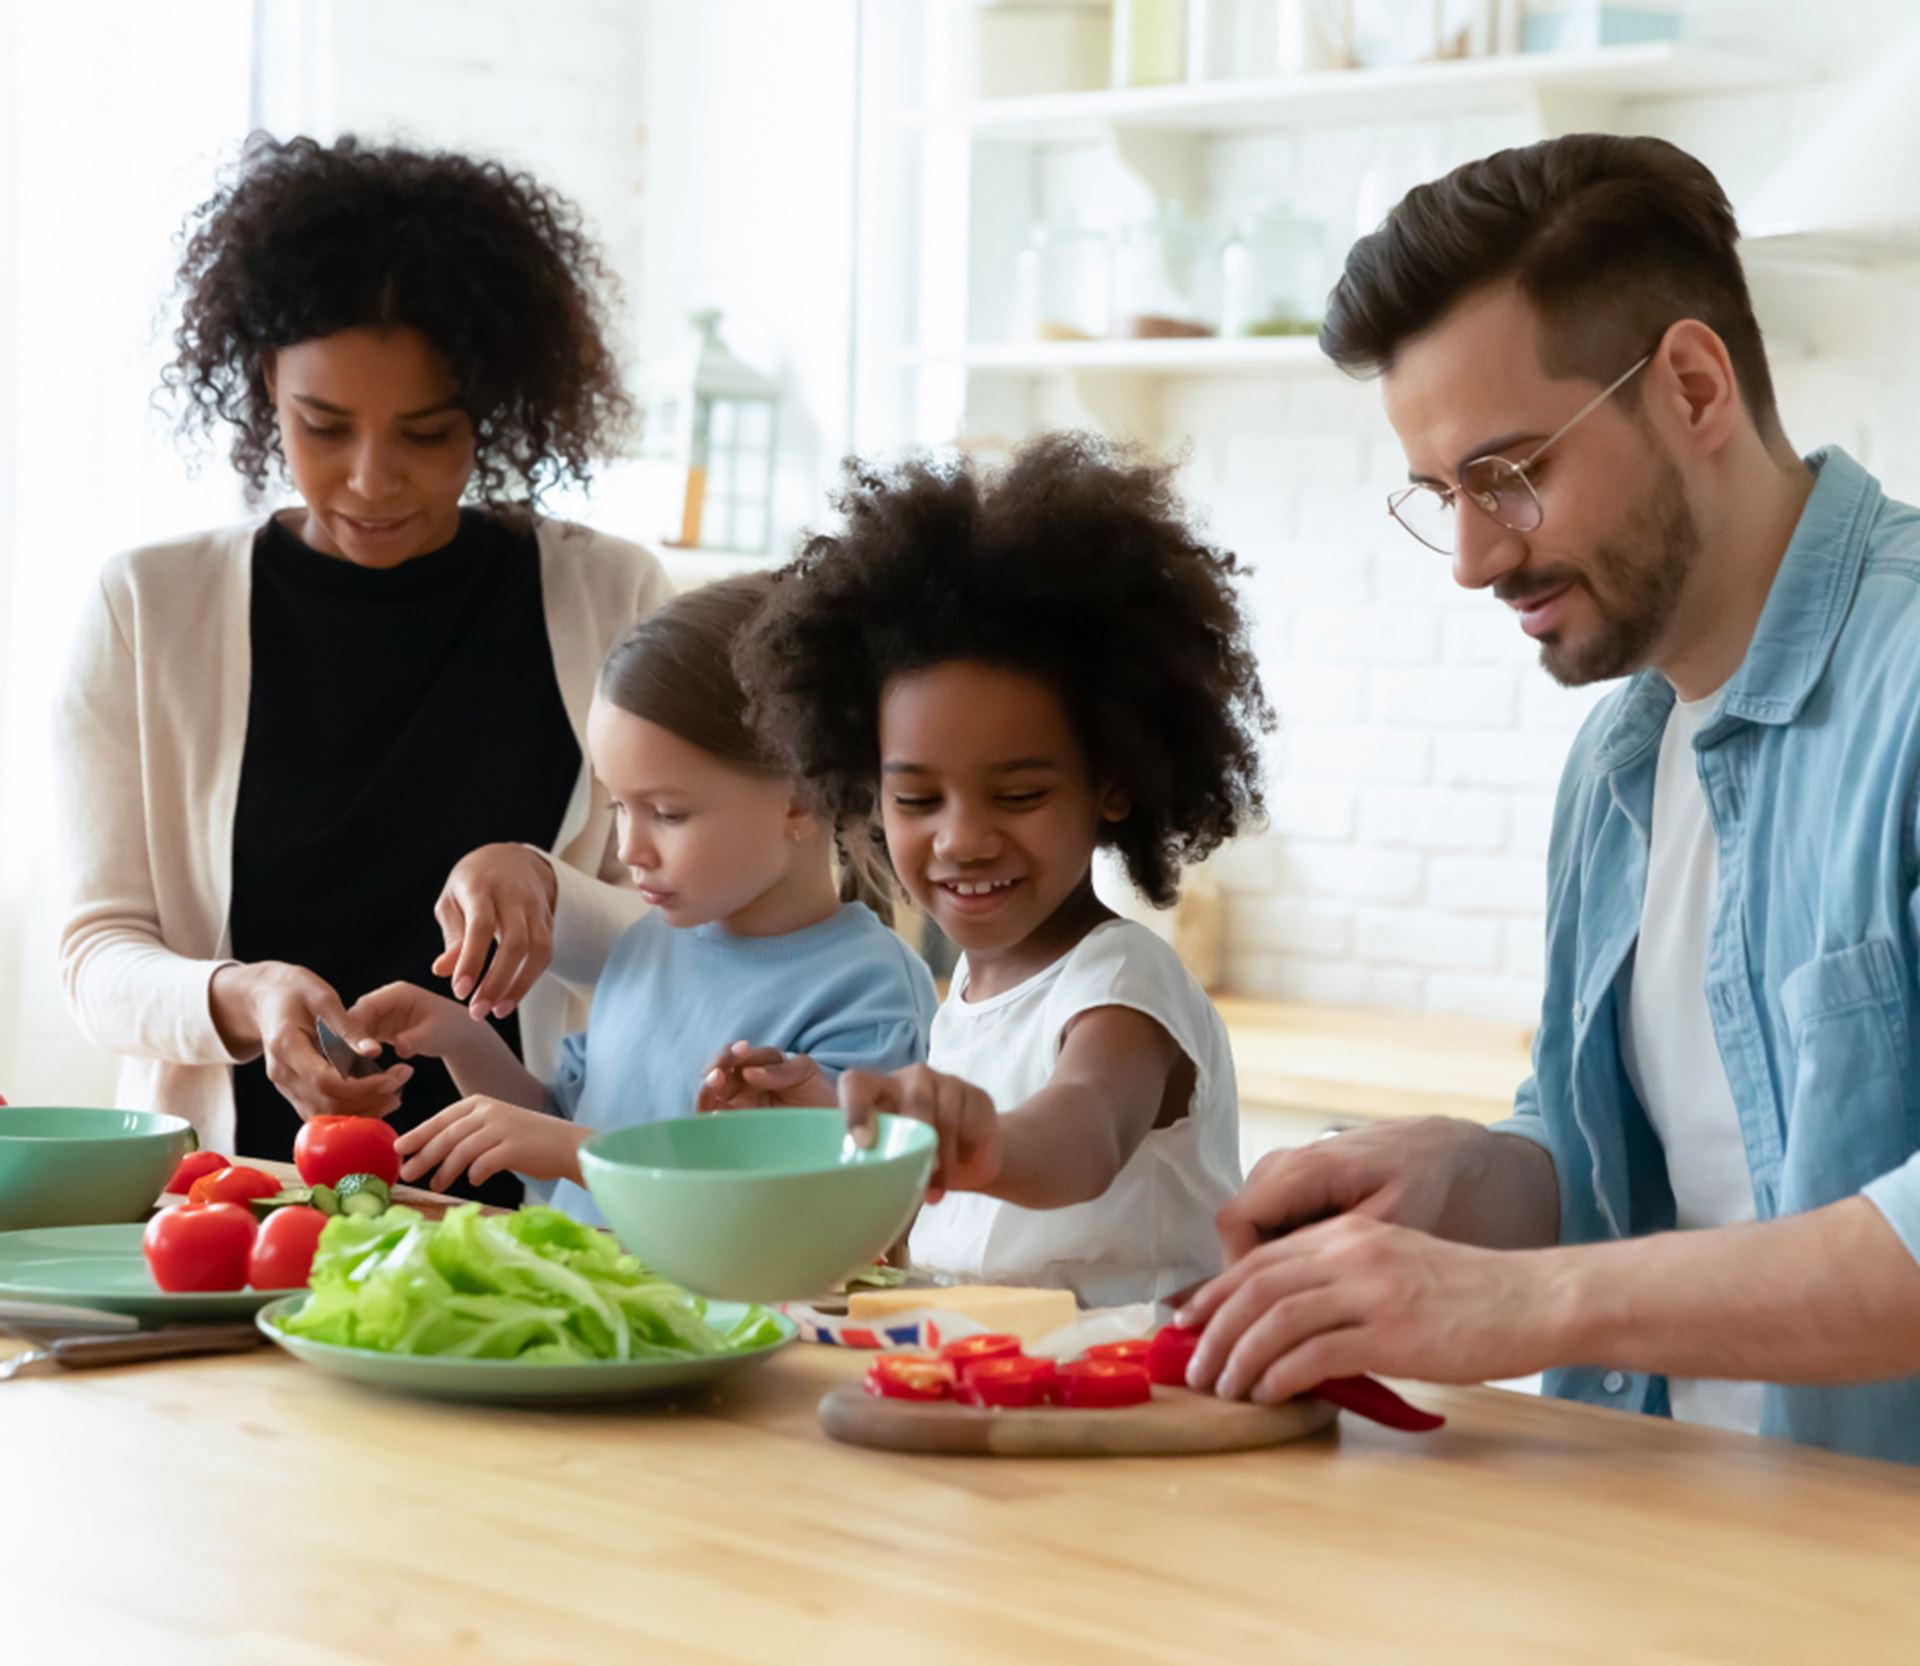 A young family in the kitchen preparing healthy snacks